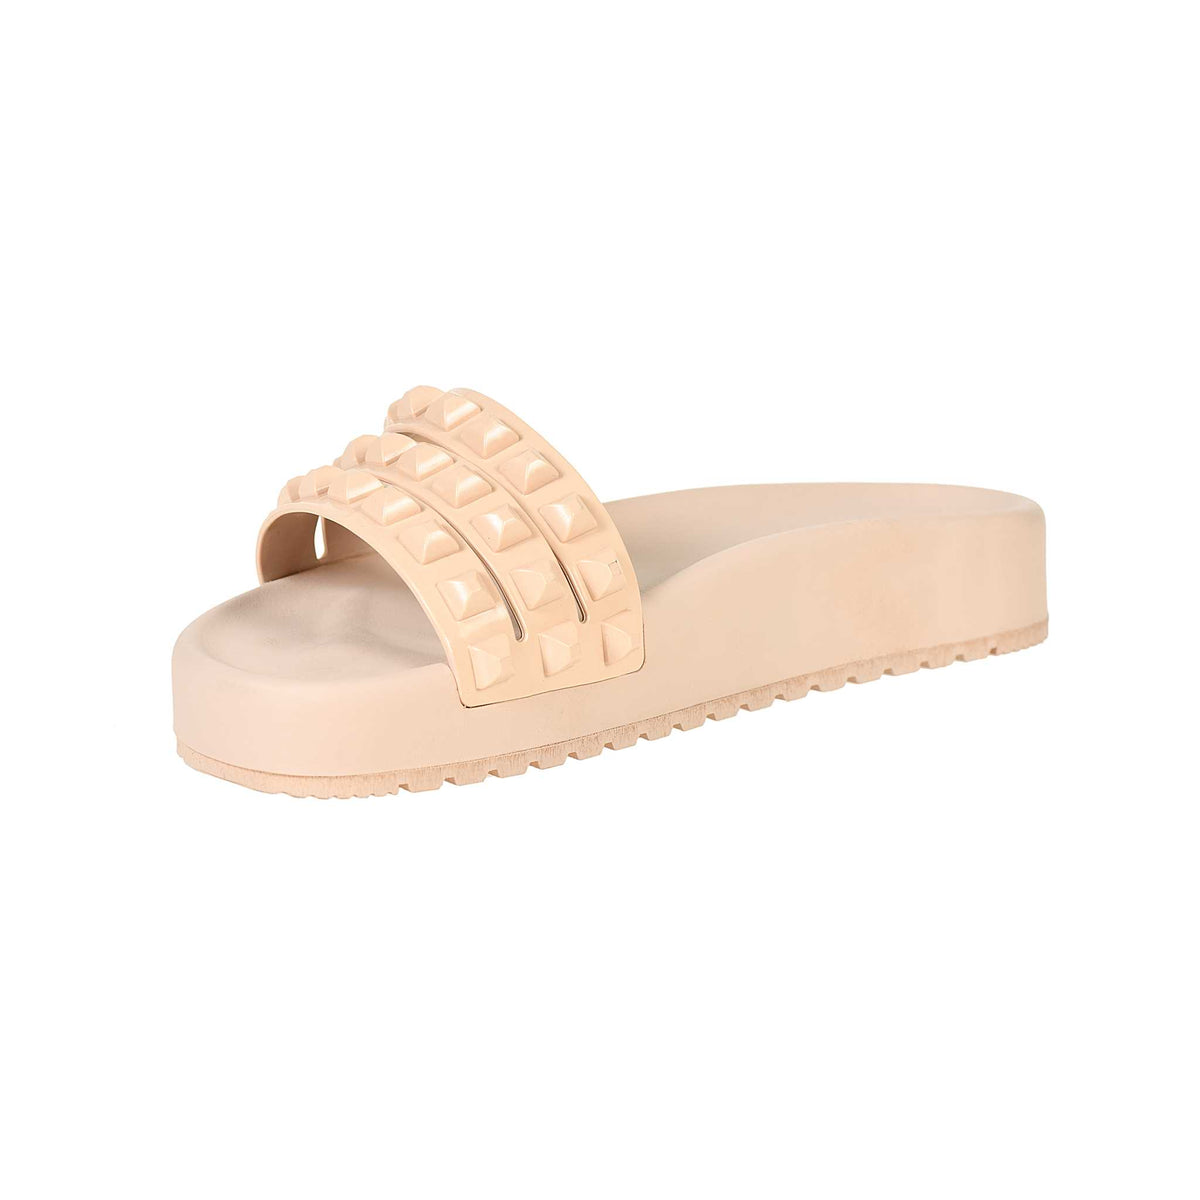 Made in Italy 3 straps jelly slides in color nude perfect for the pool